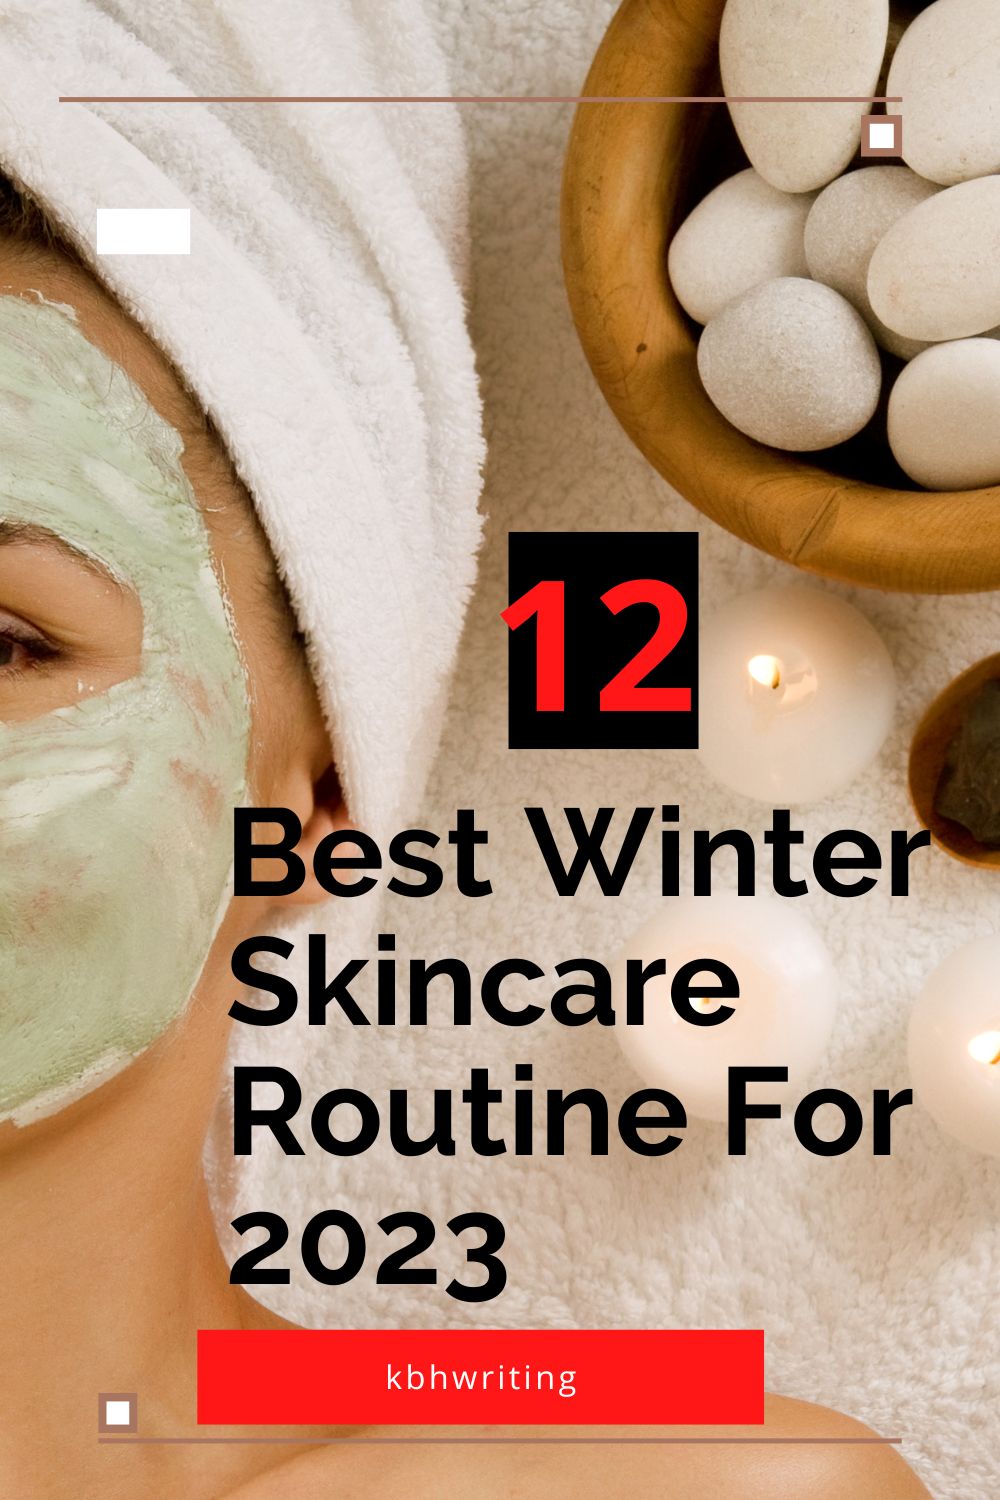 12 Best Winter Skincare Routine For 2023